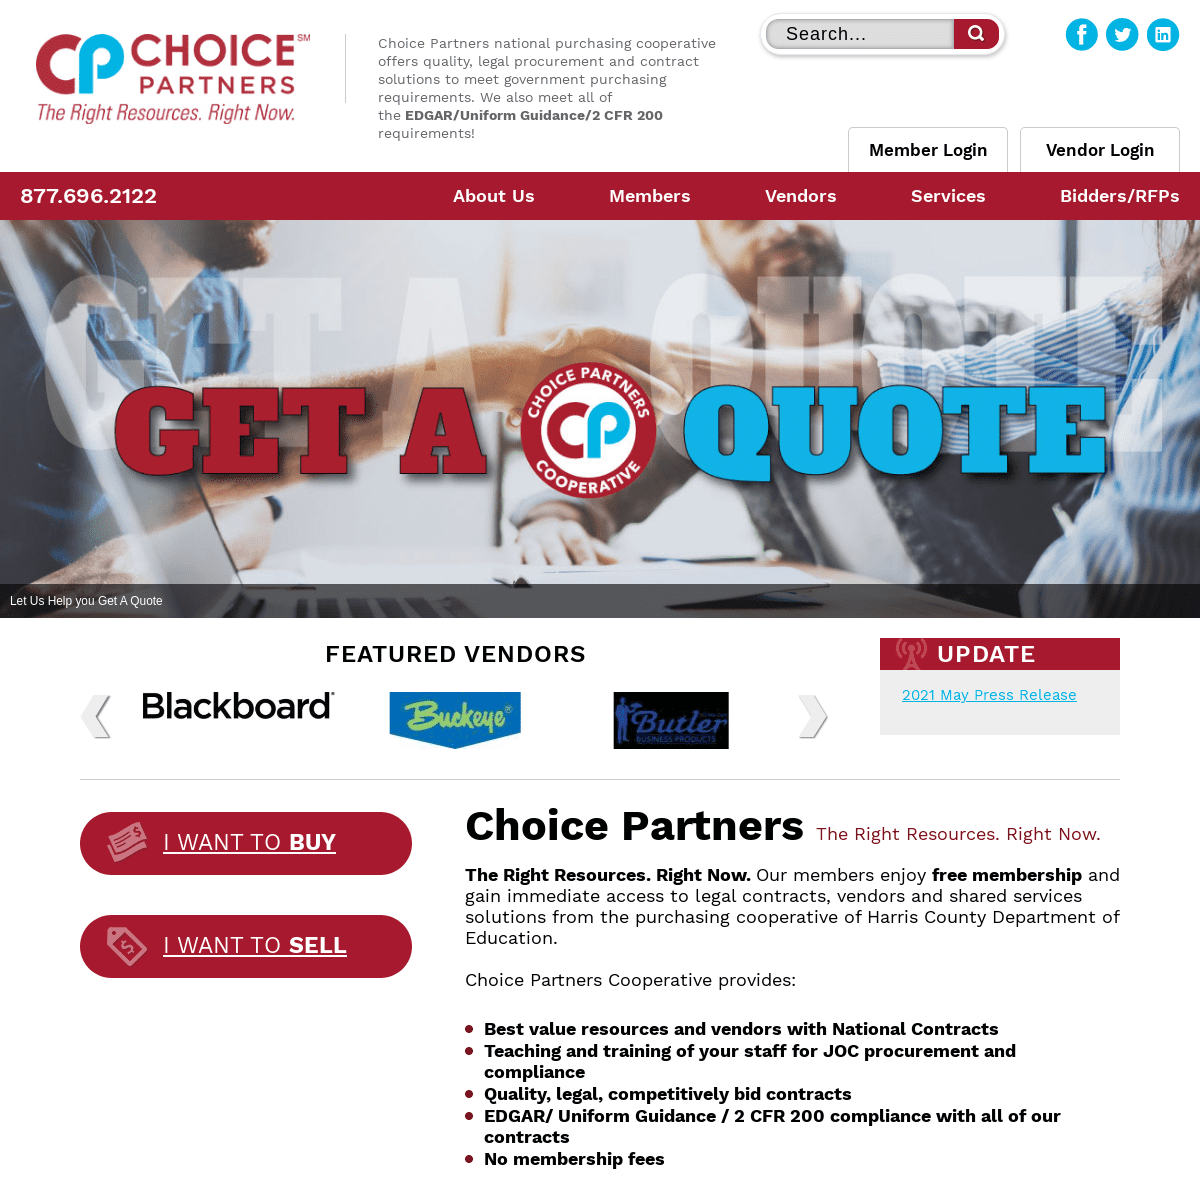 A complete backup of https://choicepartners.org